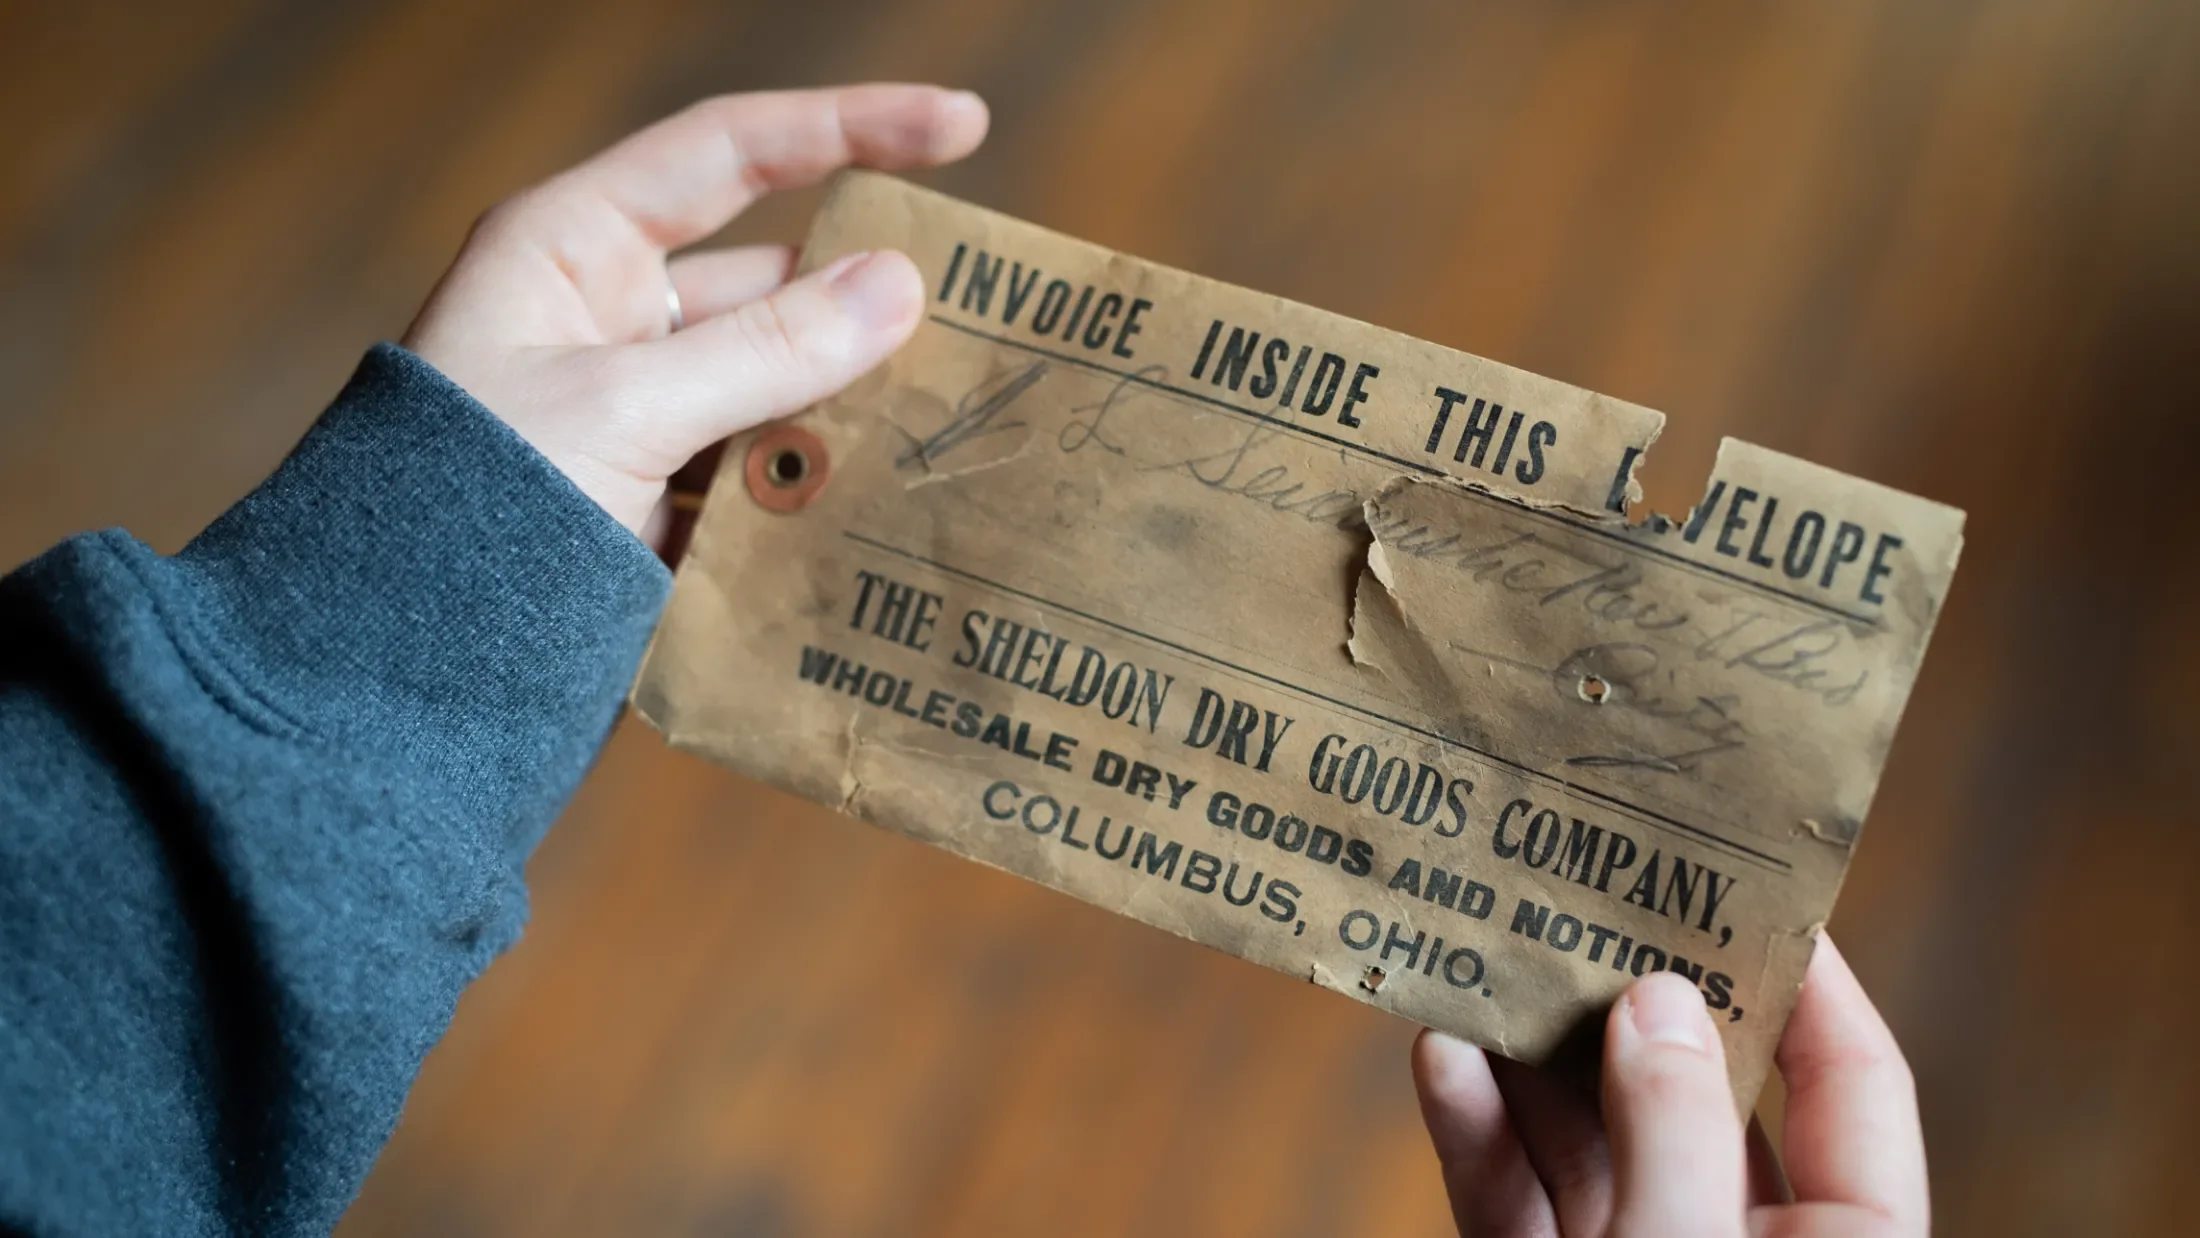 Old invoicing envelope from The Sheldon Dry Goods Company in Columbus, OH